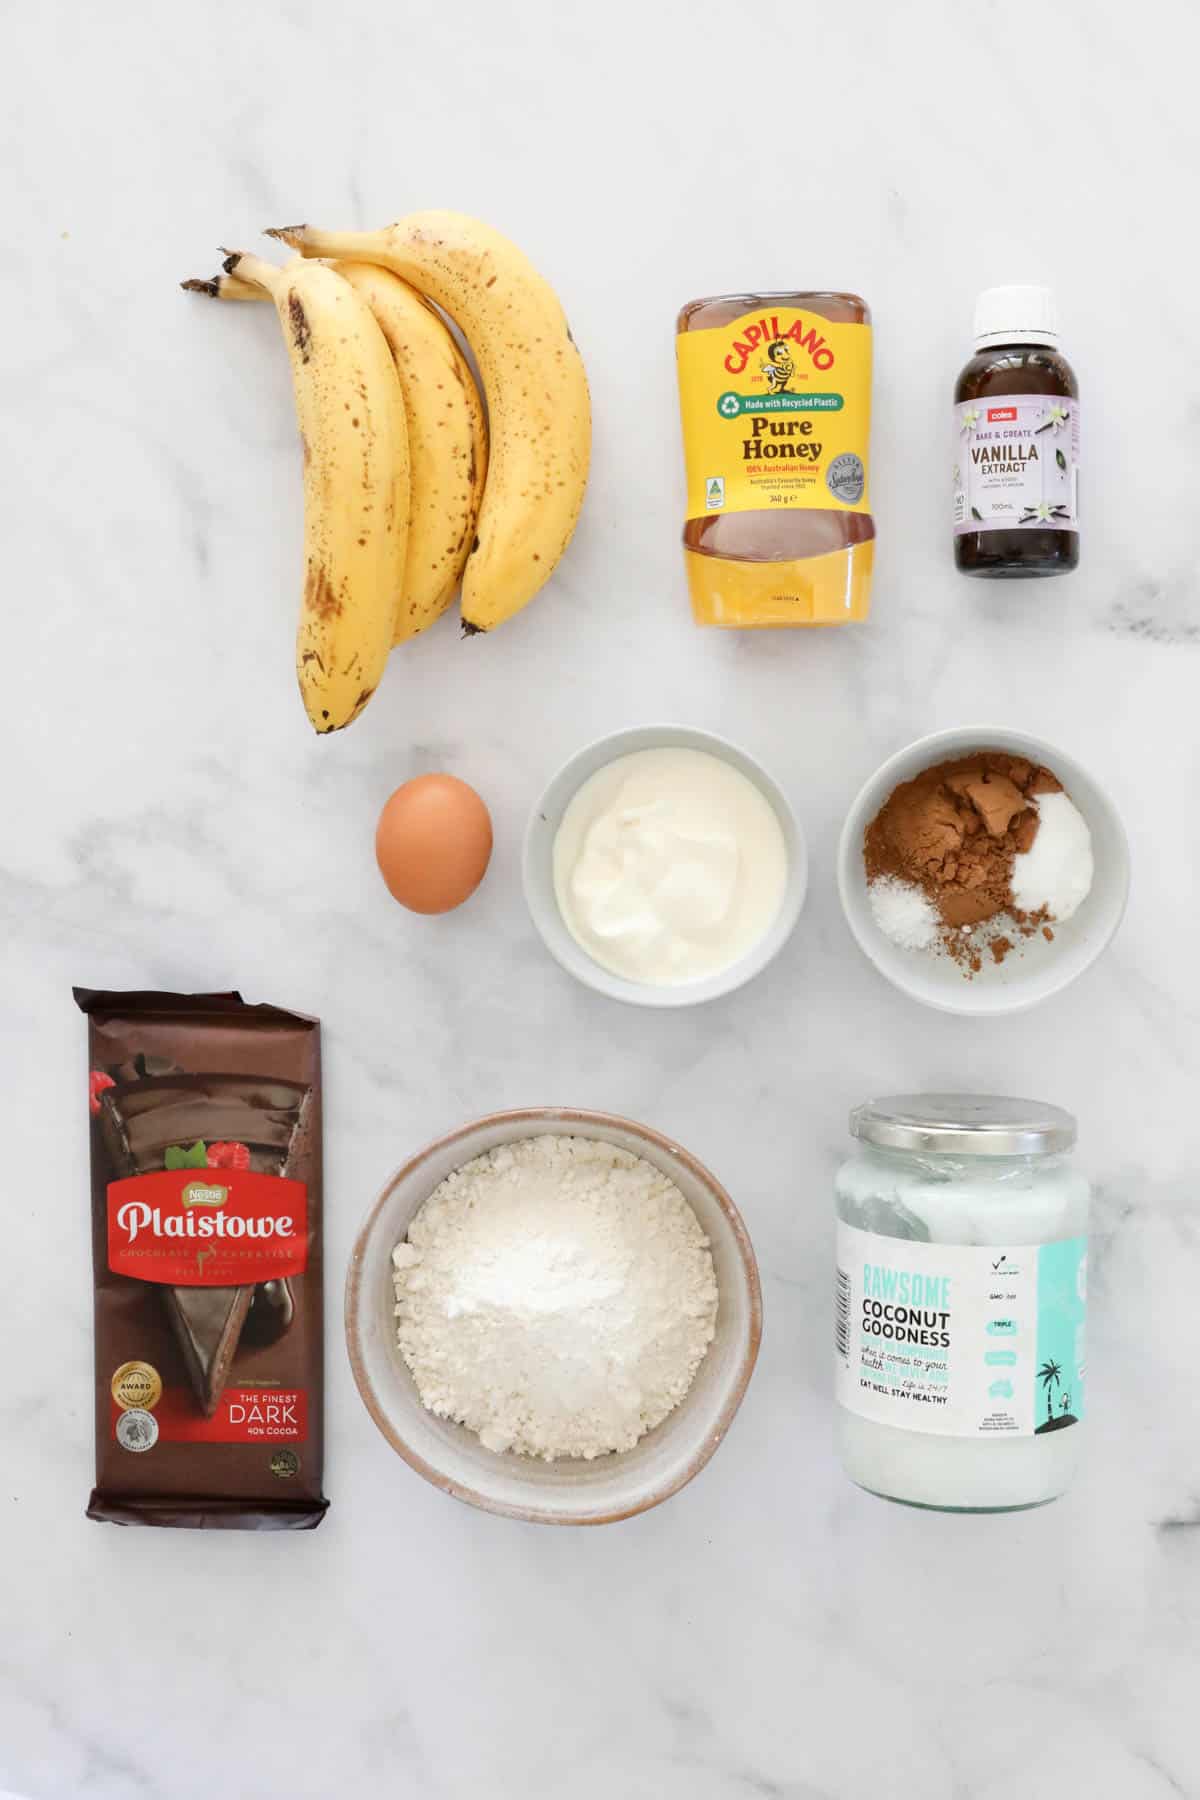 The ingredients for choc banana muffins.